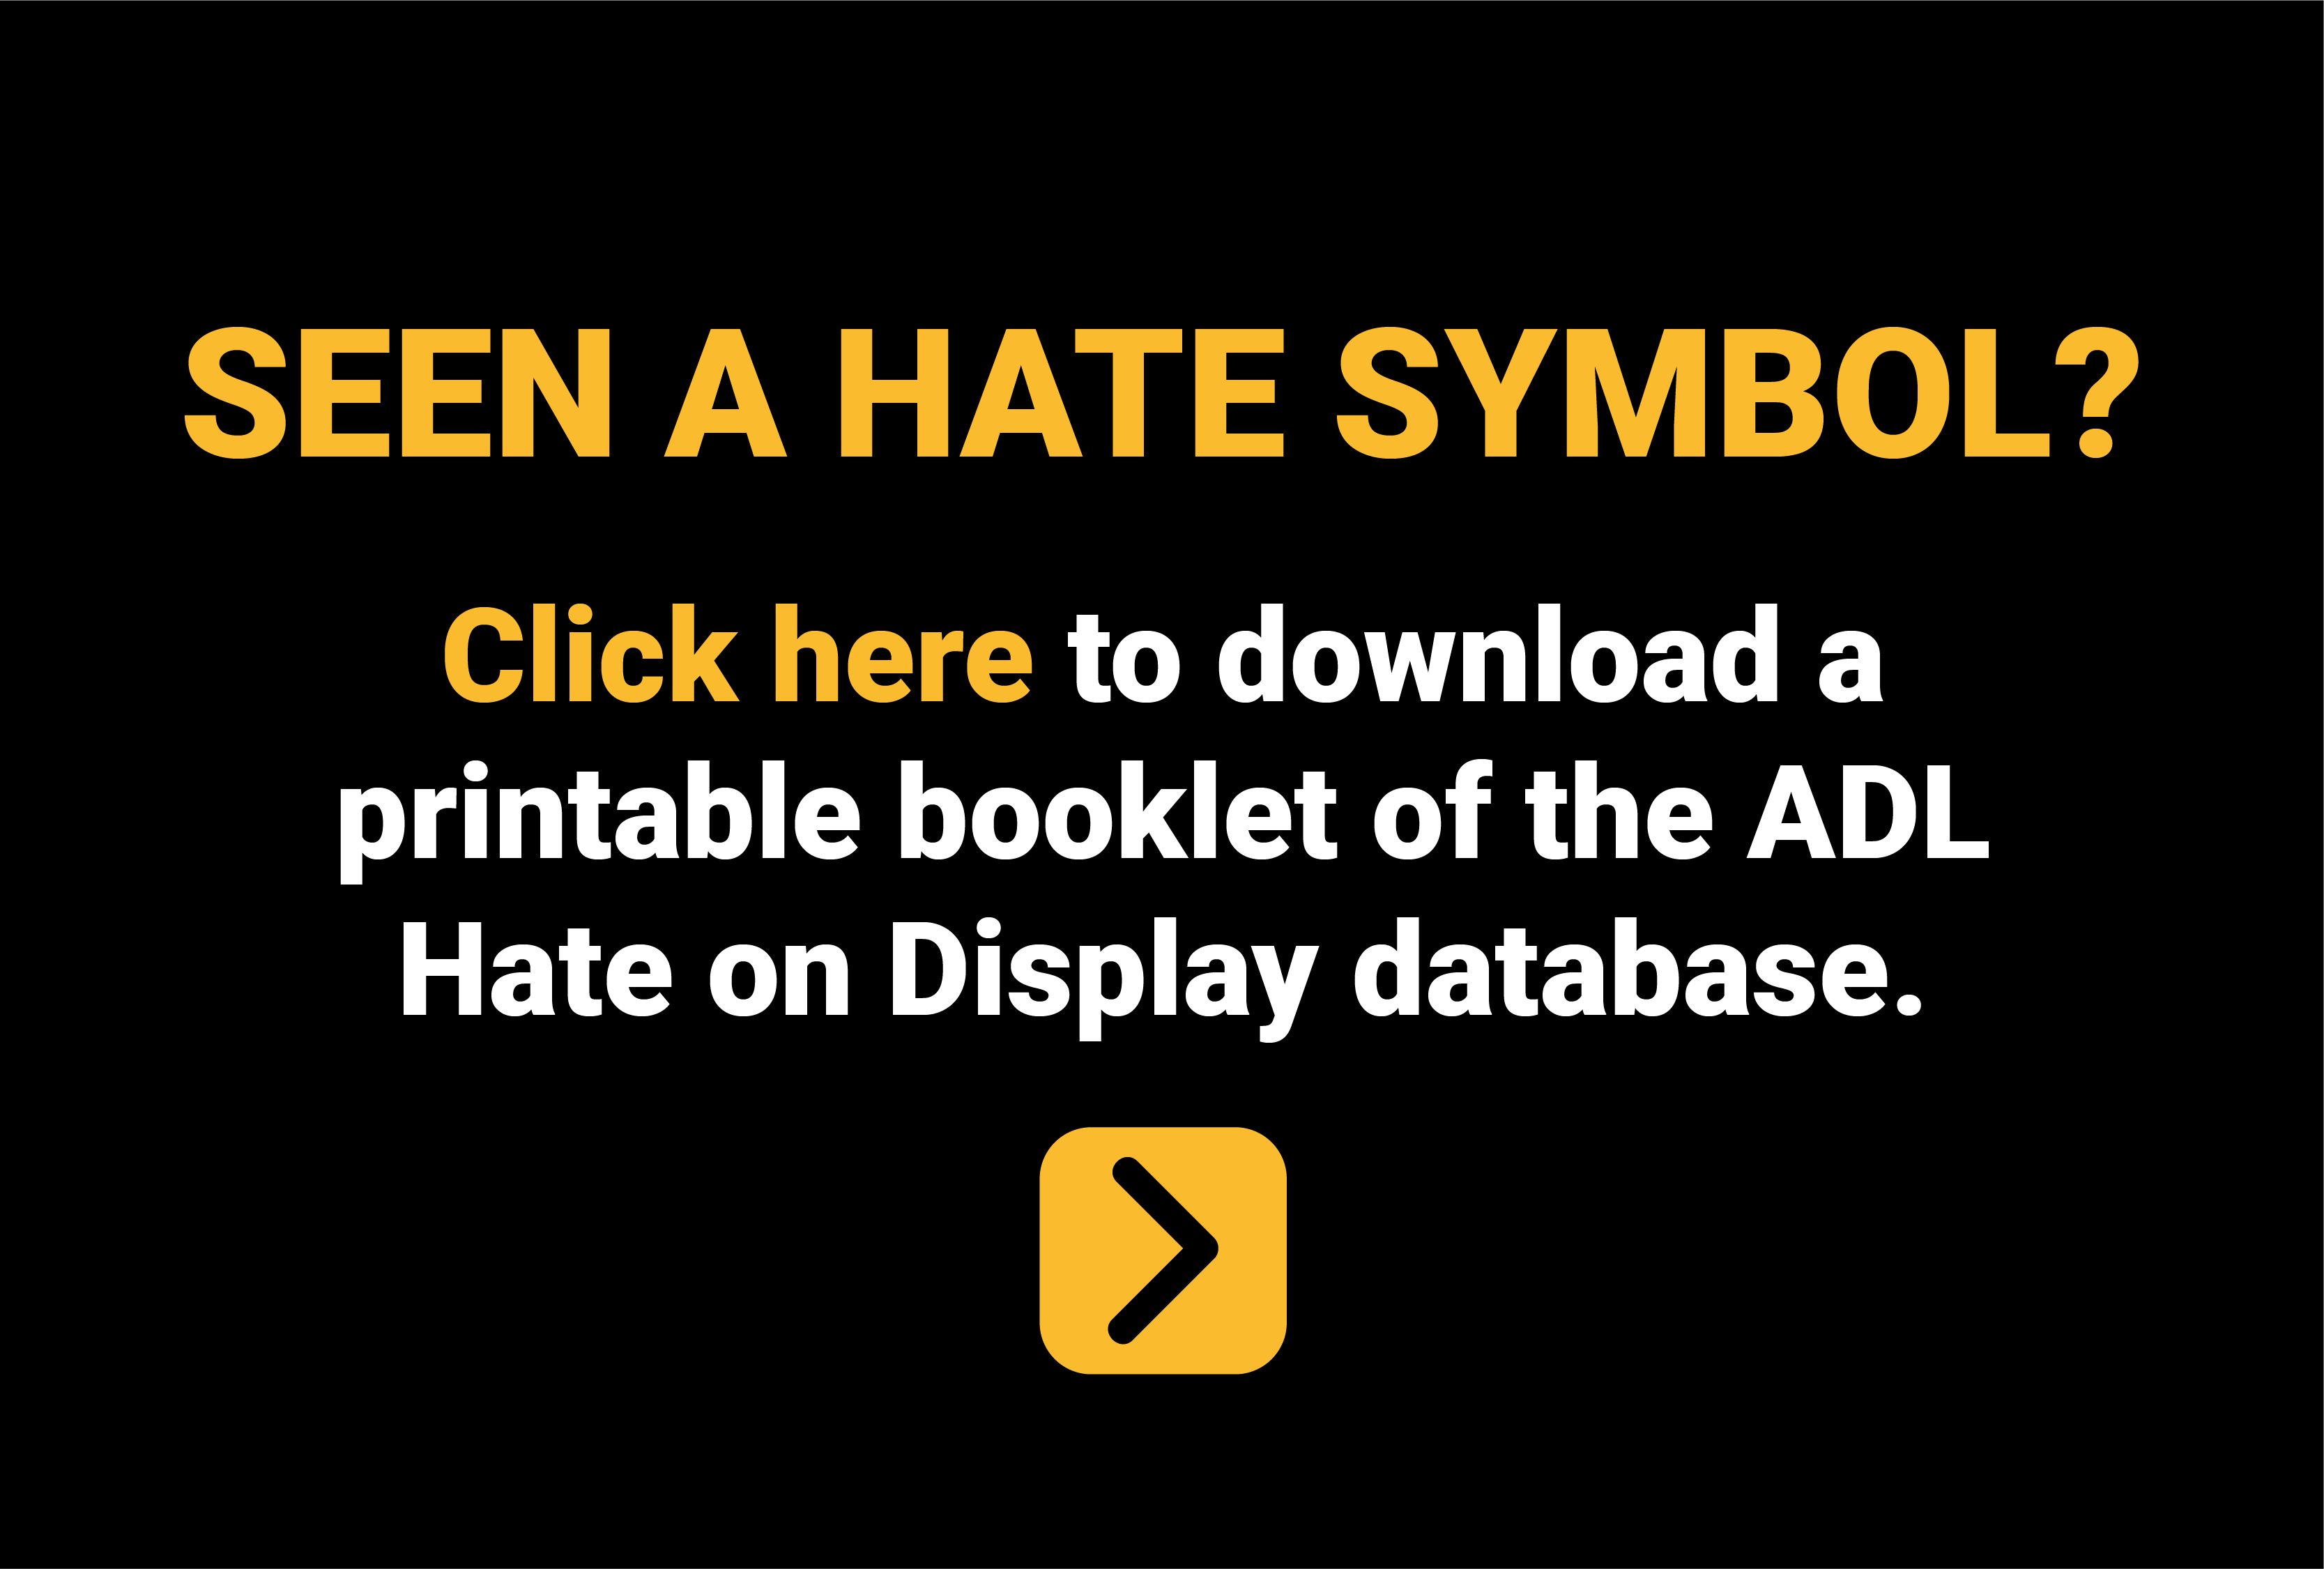 Seen a hate symbol? Click here to download a printable booklet of the ADL Hate on Display database.